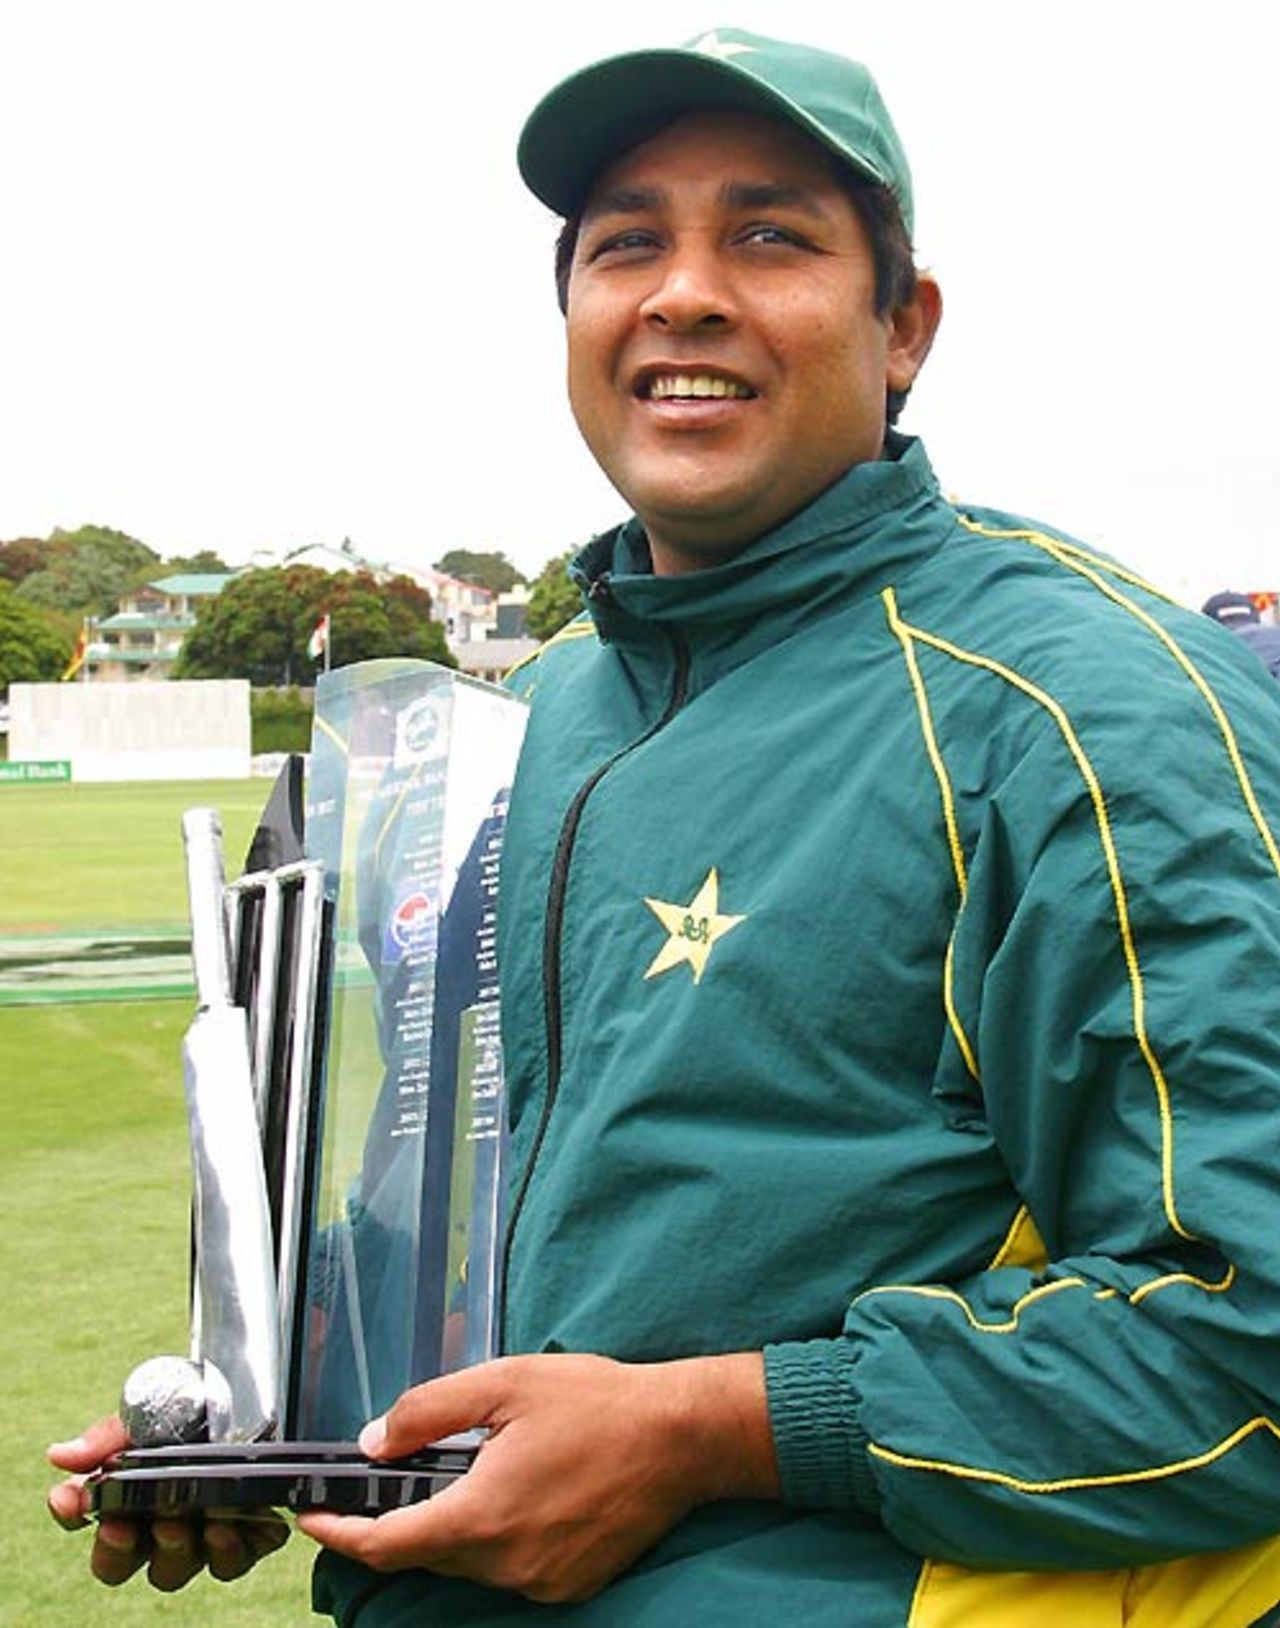 Inzamam-ul-Haq with the trophy after winning the Test series in New Zealand, Wellington, December 30, 2003